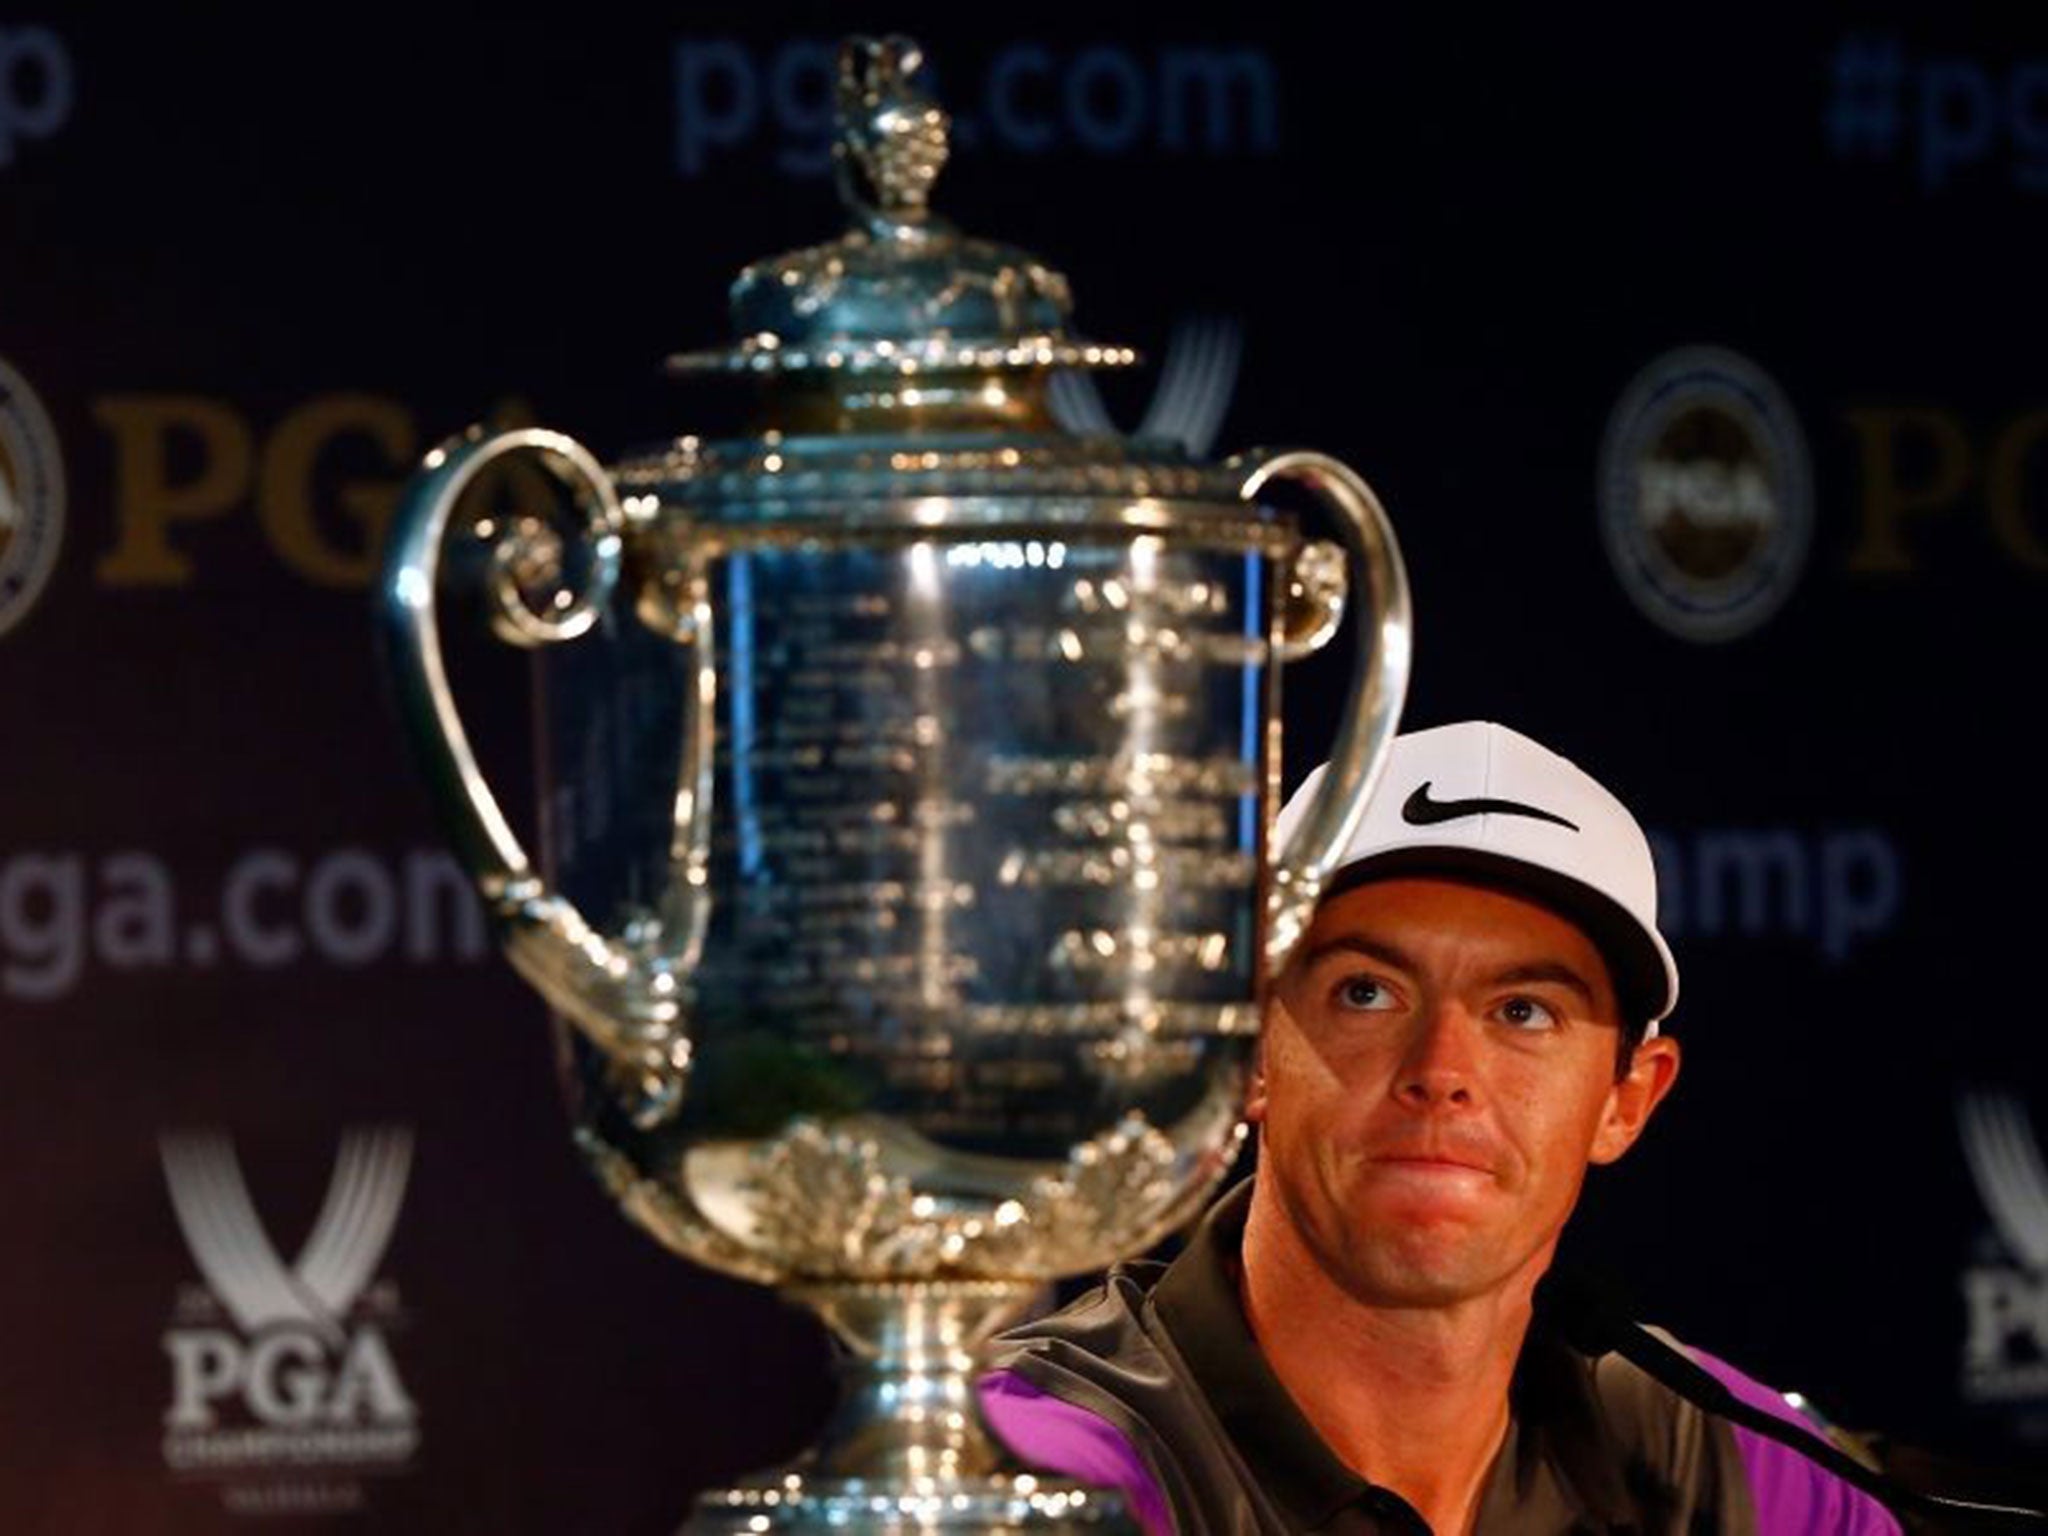 Rory McIlroy gazes at the Wanamaker Trophy after his one-stroke victory in the US PGA Championship late on Sunday night